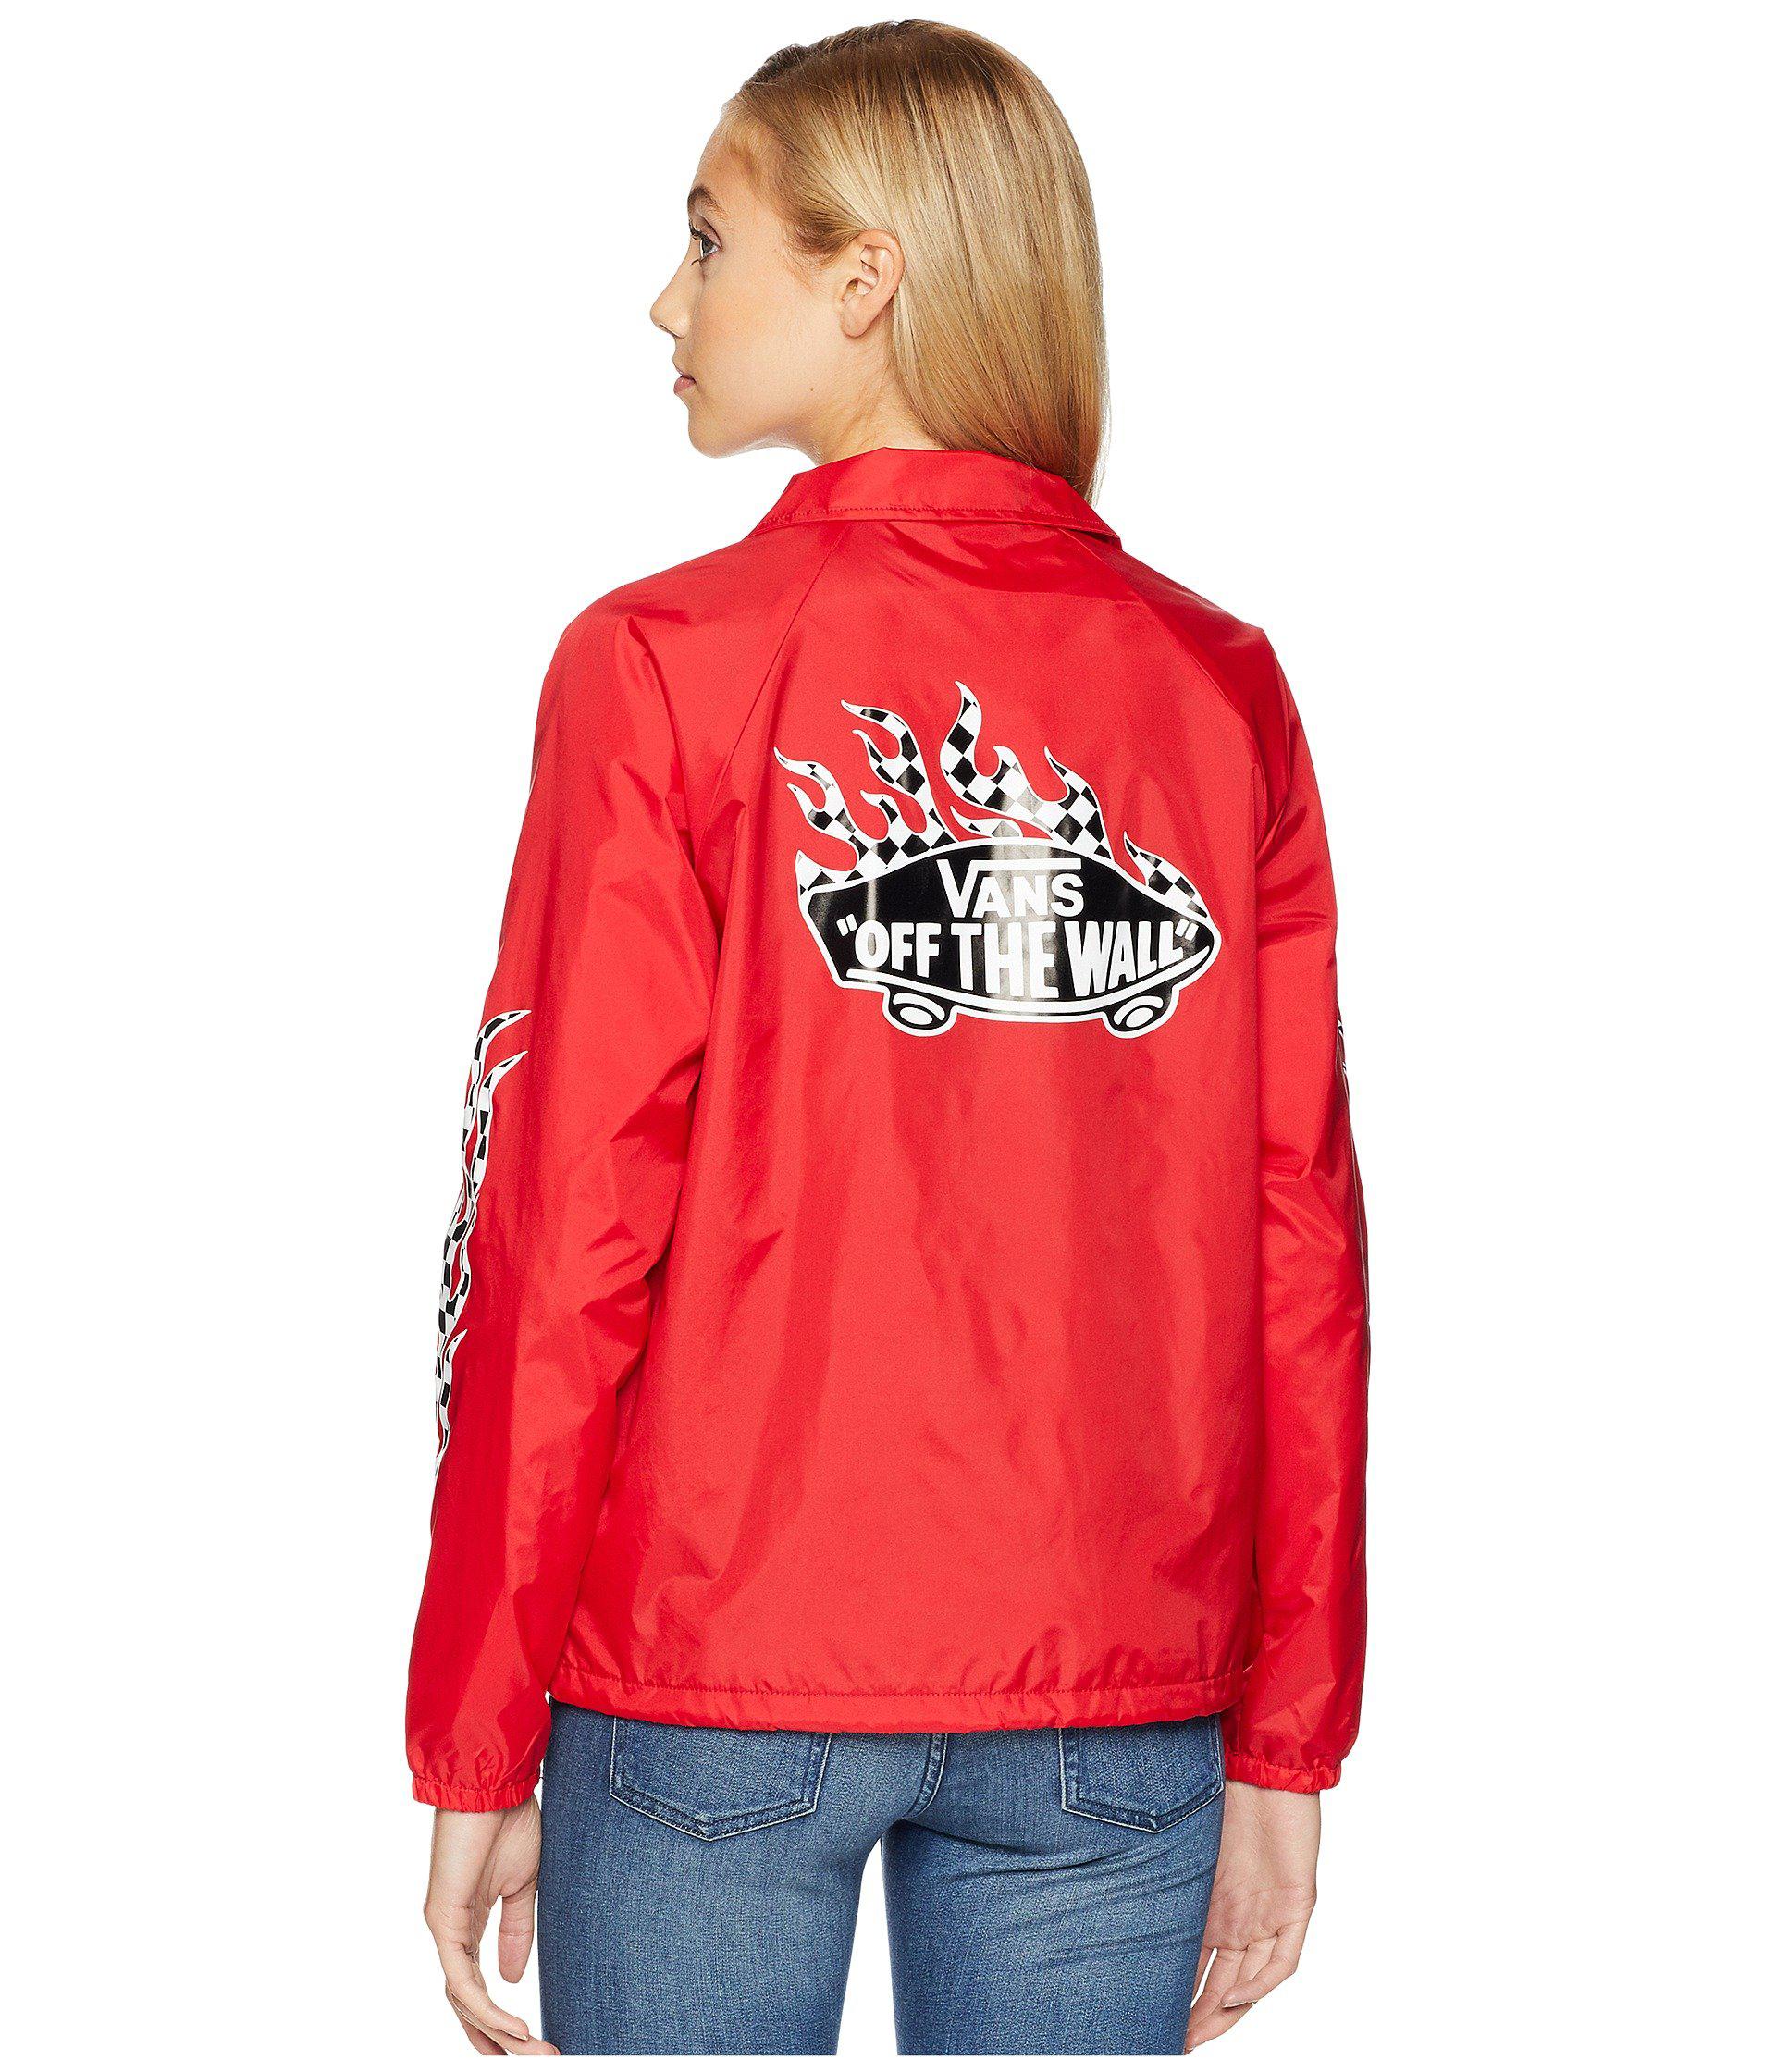 vans checkerboard flame red coaches jacket